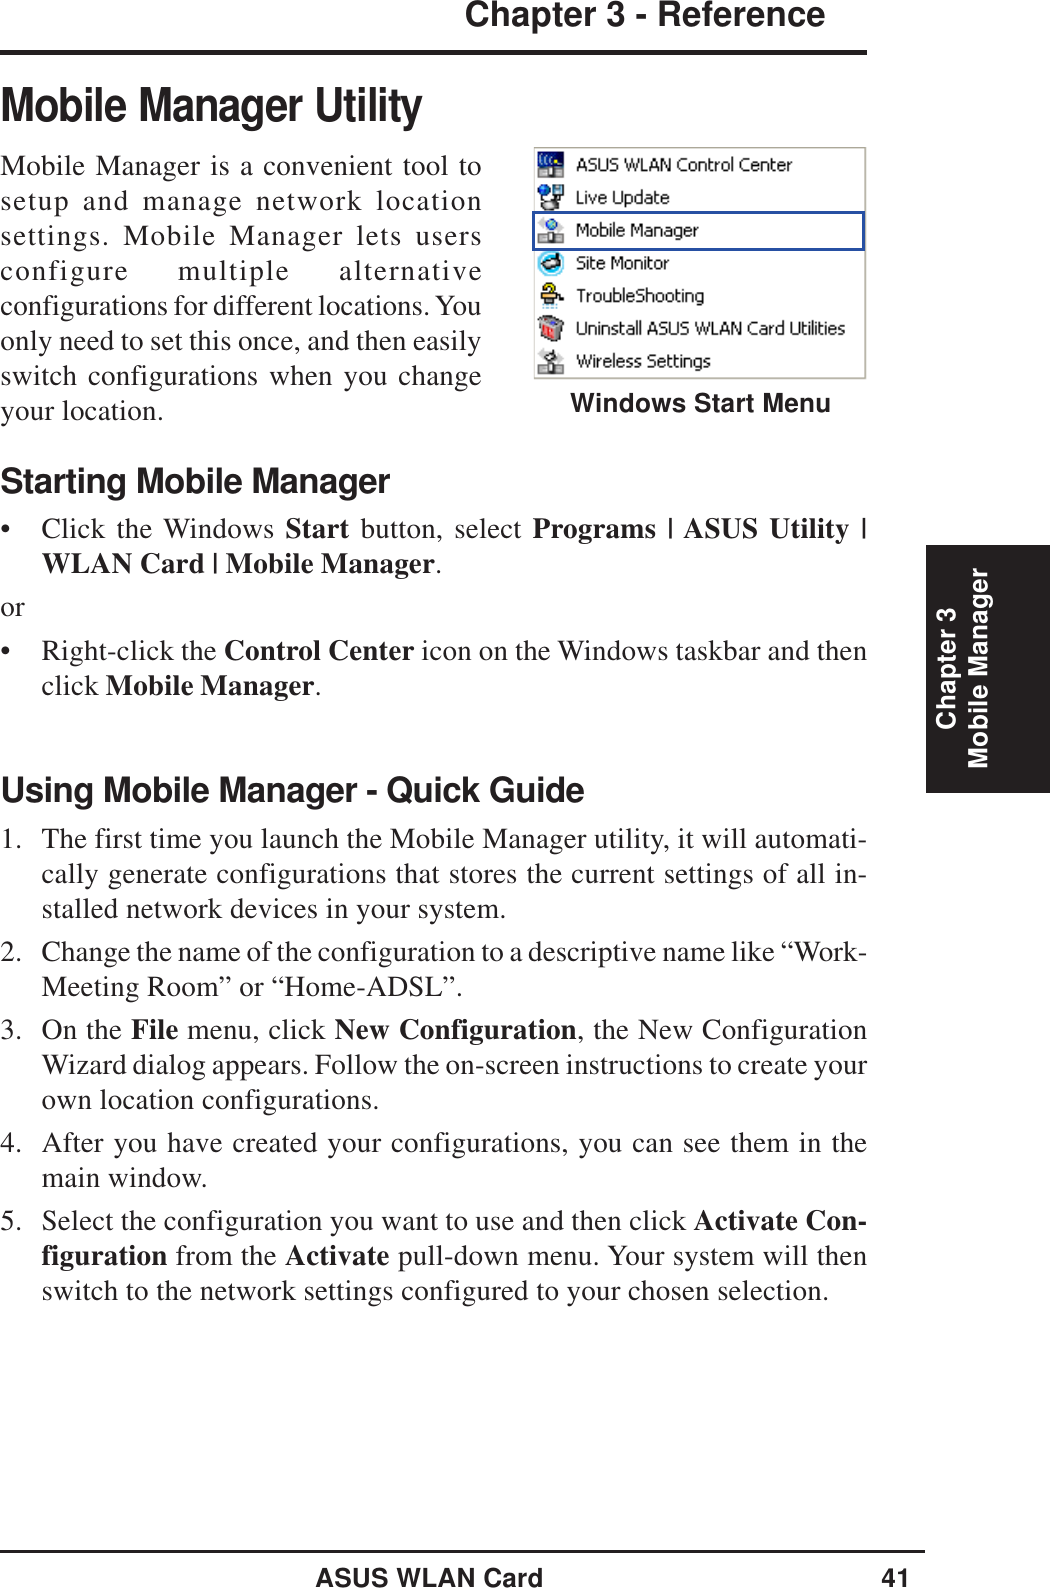 ASUS WLAN Card 41Chapter 3 - ReferenceChapter 3Mobile ManagerMobile Manager UtilityMobile Manager is a convenient tool tosetup and manage network locationsettings. Mobile Manager lets usersconfigure multiple alternativeconfigurations for different locations. Youonly need to set this once, and then easilyswitch configurations when you changeyour location.Starting Mobile Manager• Click the Windows Start button, select Programs | ASUS Utility |WLAN Card | Mobile Manager.or• Right-click the Control Center icon on the Windows taskbar and thenclick Mobile Manager.Using Mobile Manager - Quick Guide1. The first time you launch the Mobile Manager utility, it will automati-cally generate configurations that stores the current settings of all in-stalled network devices in your system.2. Change the name of the configuration to a descriptive name like “Work-Meeting Room” or “Home-ADSL”.3. On the File menu, click New Configuration, the New ConfigurationWizard dialog appears. Follow the on-screen instructions to create yourown location configurations.4. After you have created your configurations, you can see them in themain window.5. Select the configuration you want to use and then click Activate Con-figuration from the Activate pull-down menu. Your system will thenswitch to the network settings configured to your chosen selection.Windows Start Menu